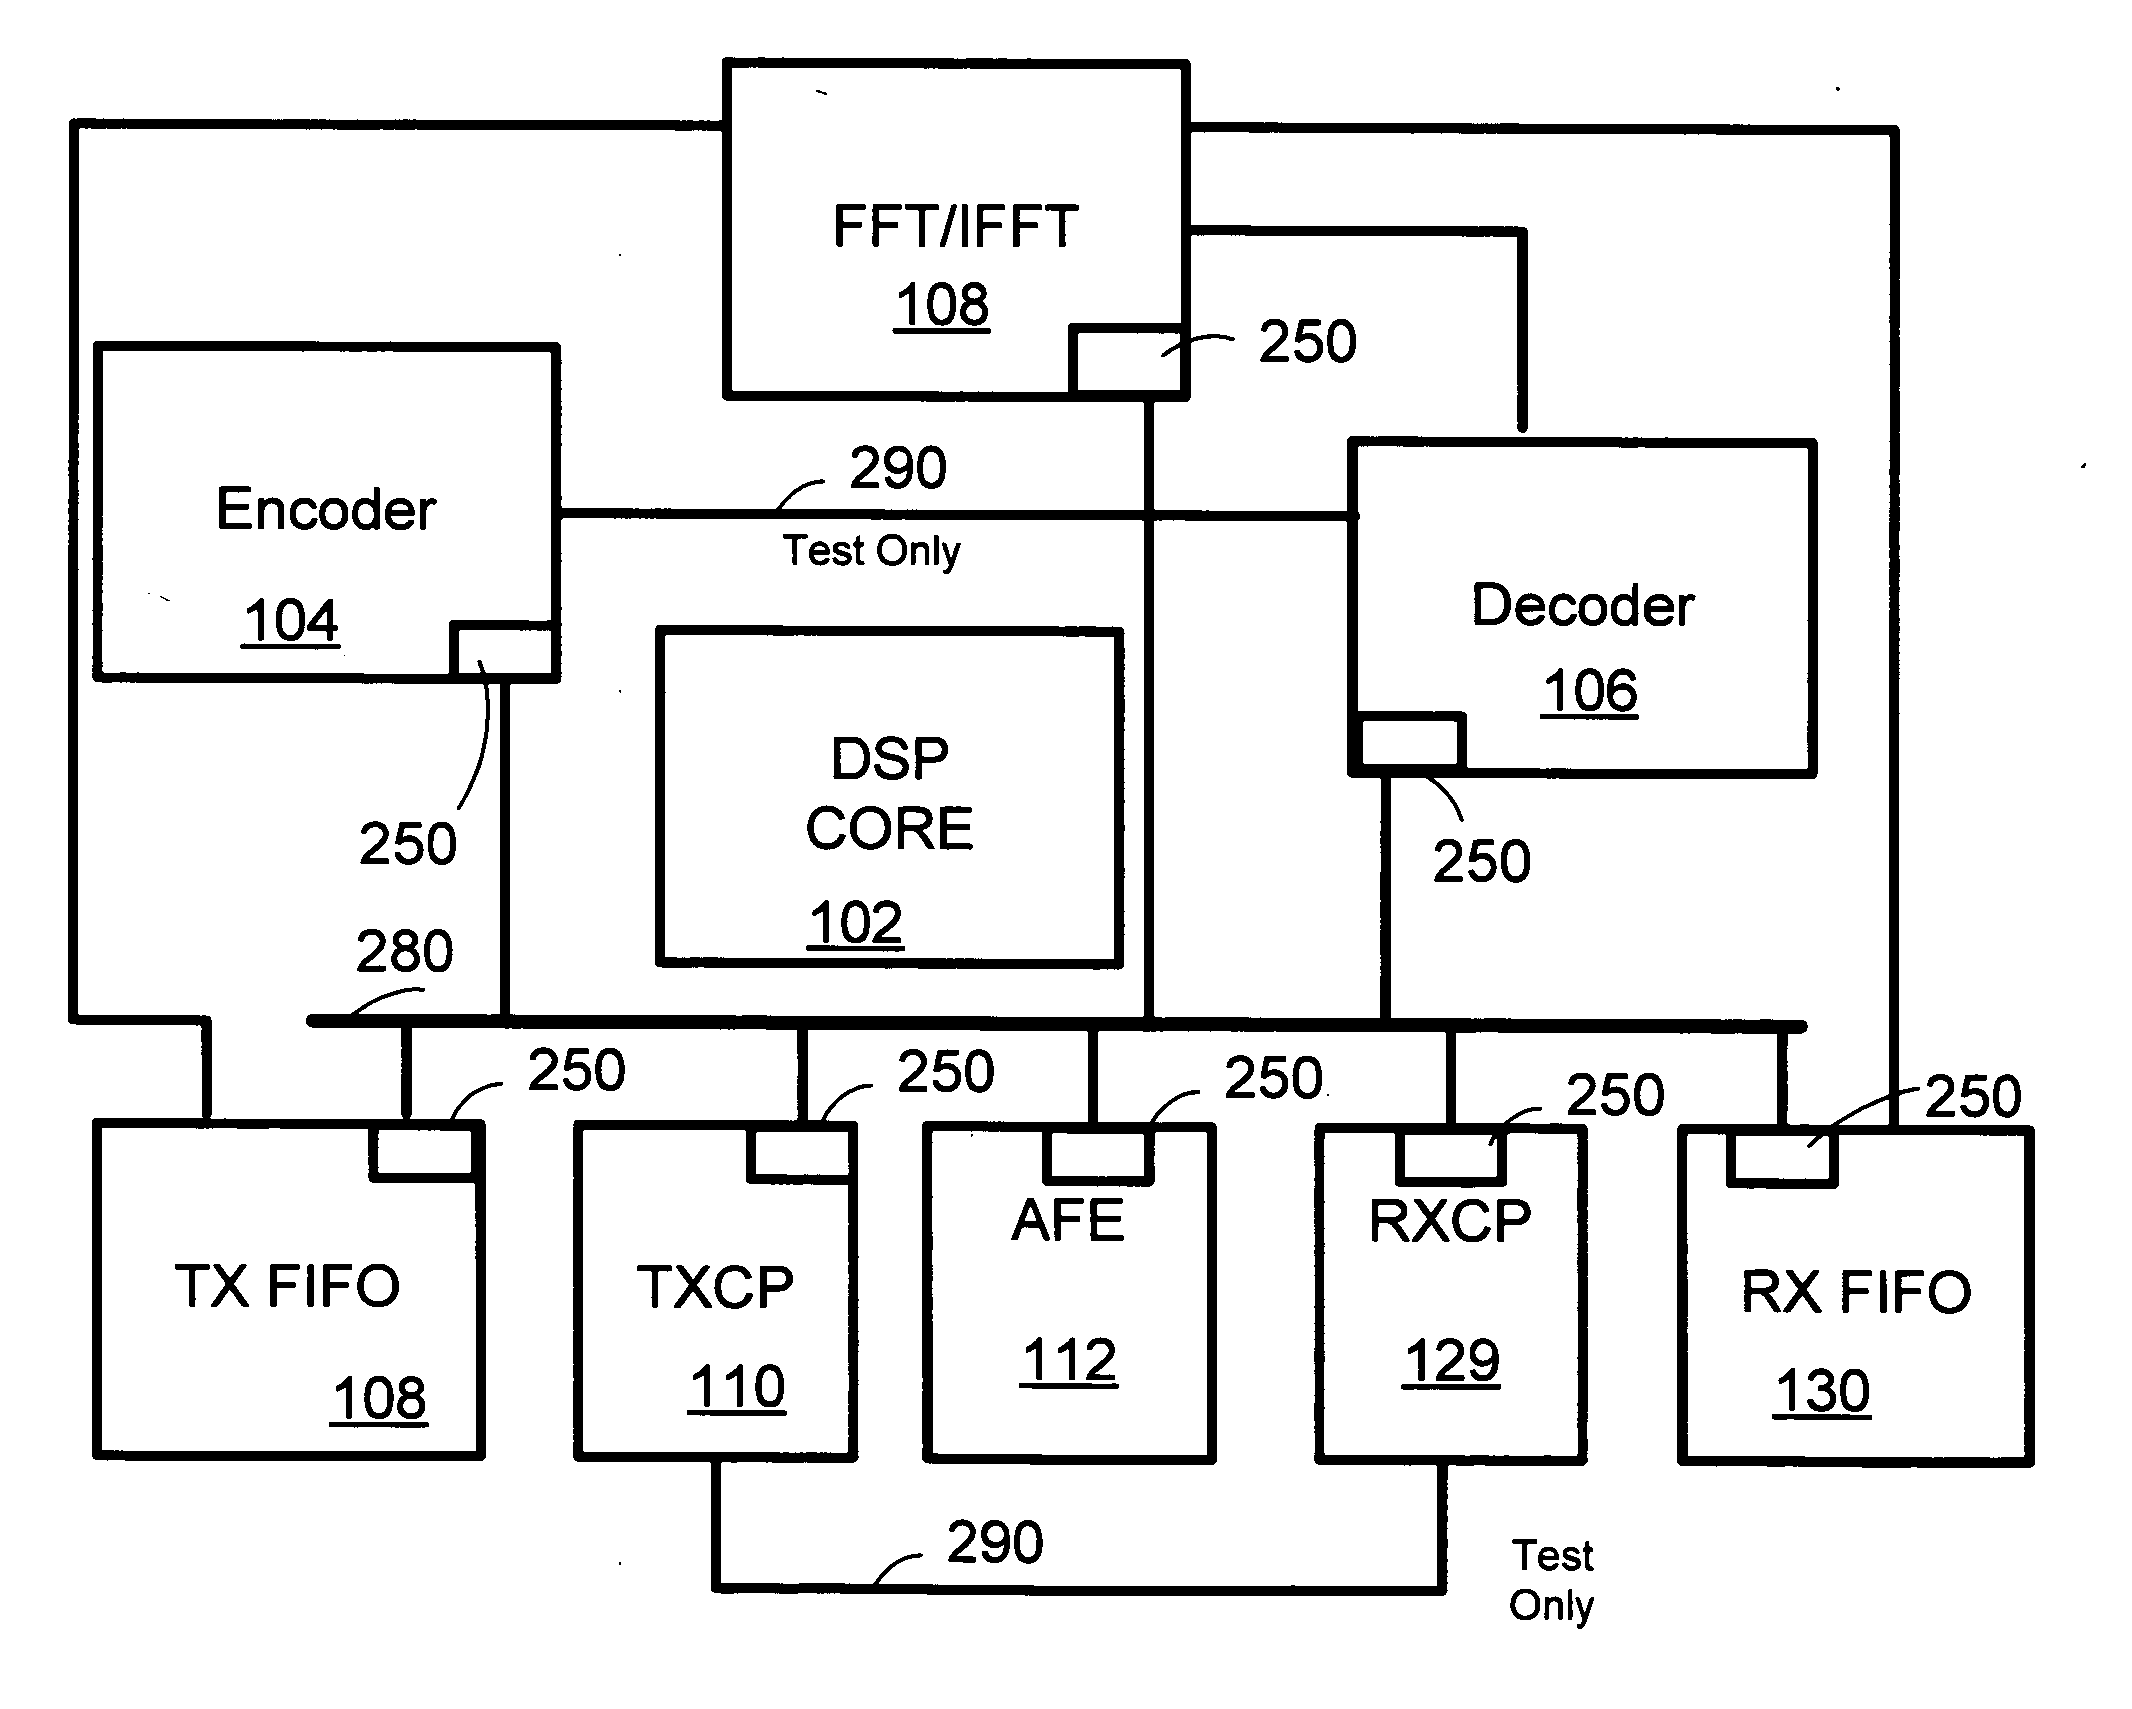 System and method for a fast fourier transform architecture in a multicarrier transceiver